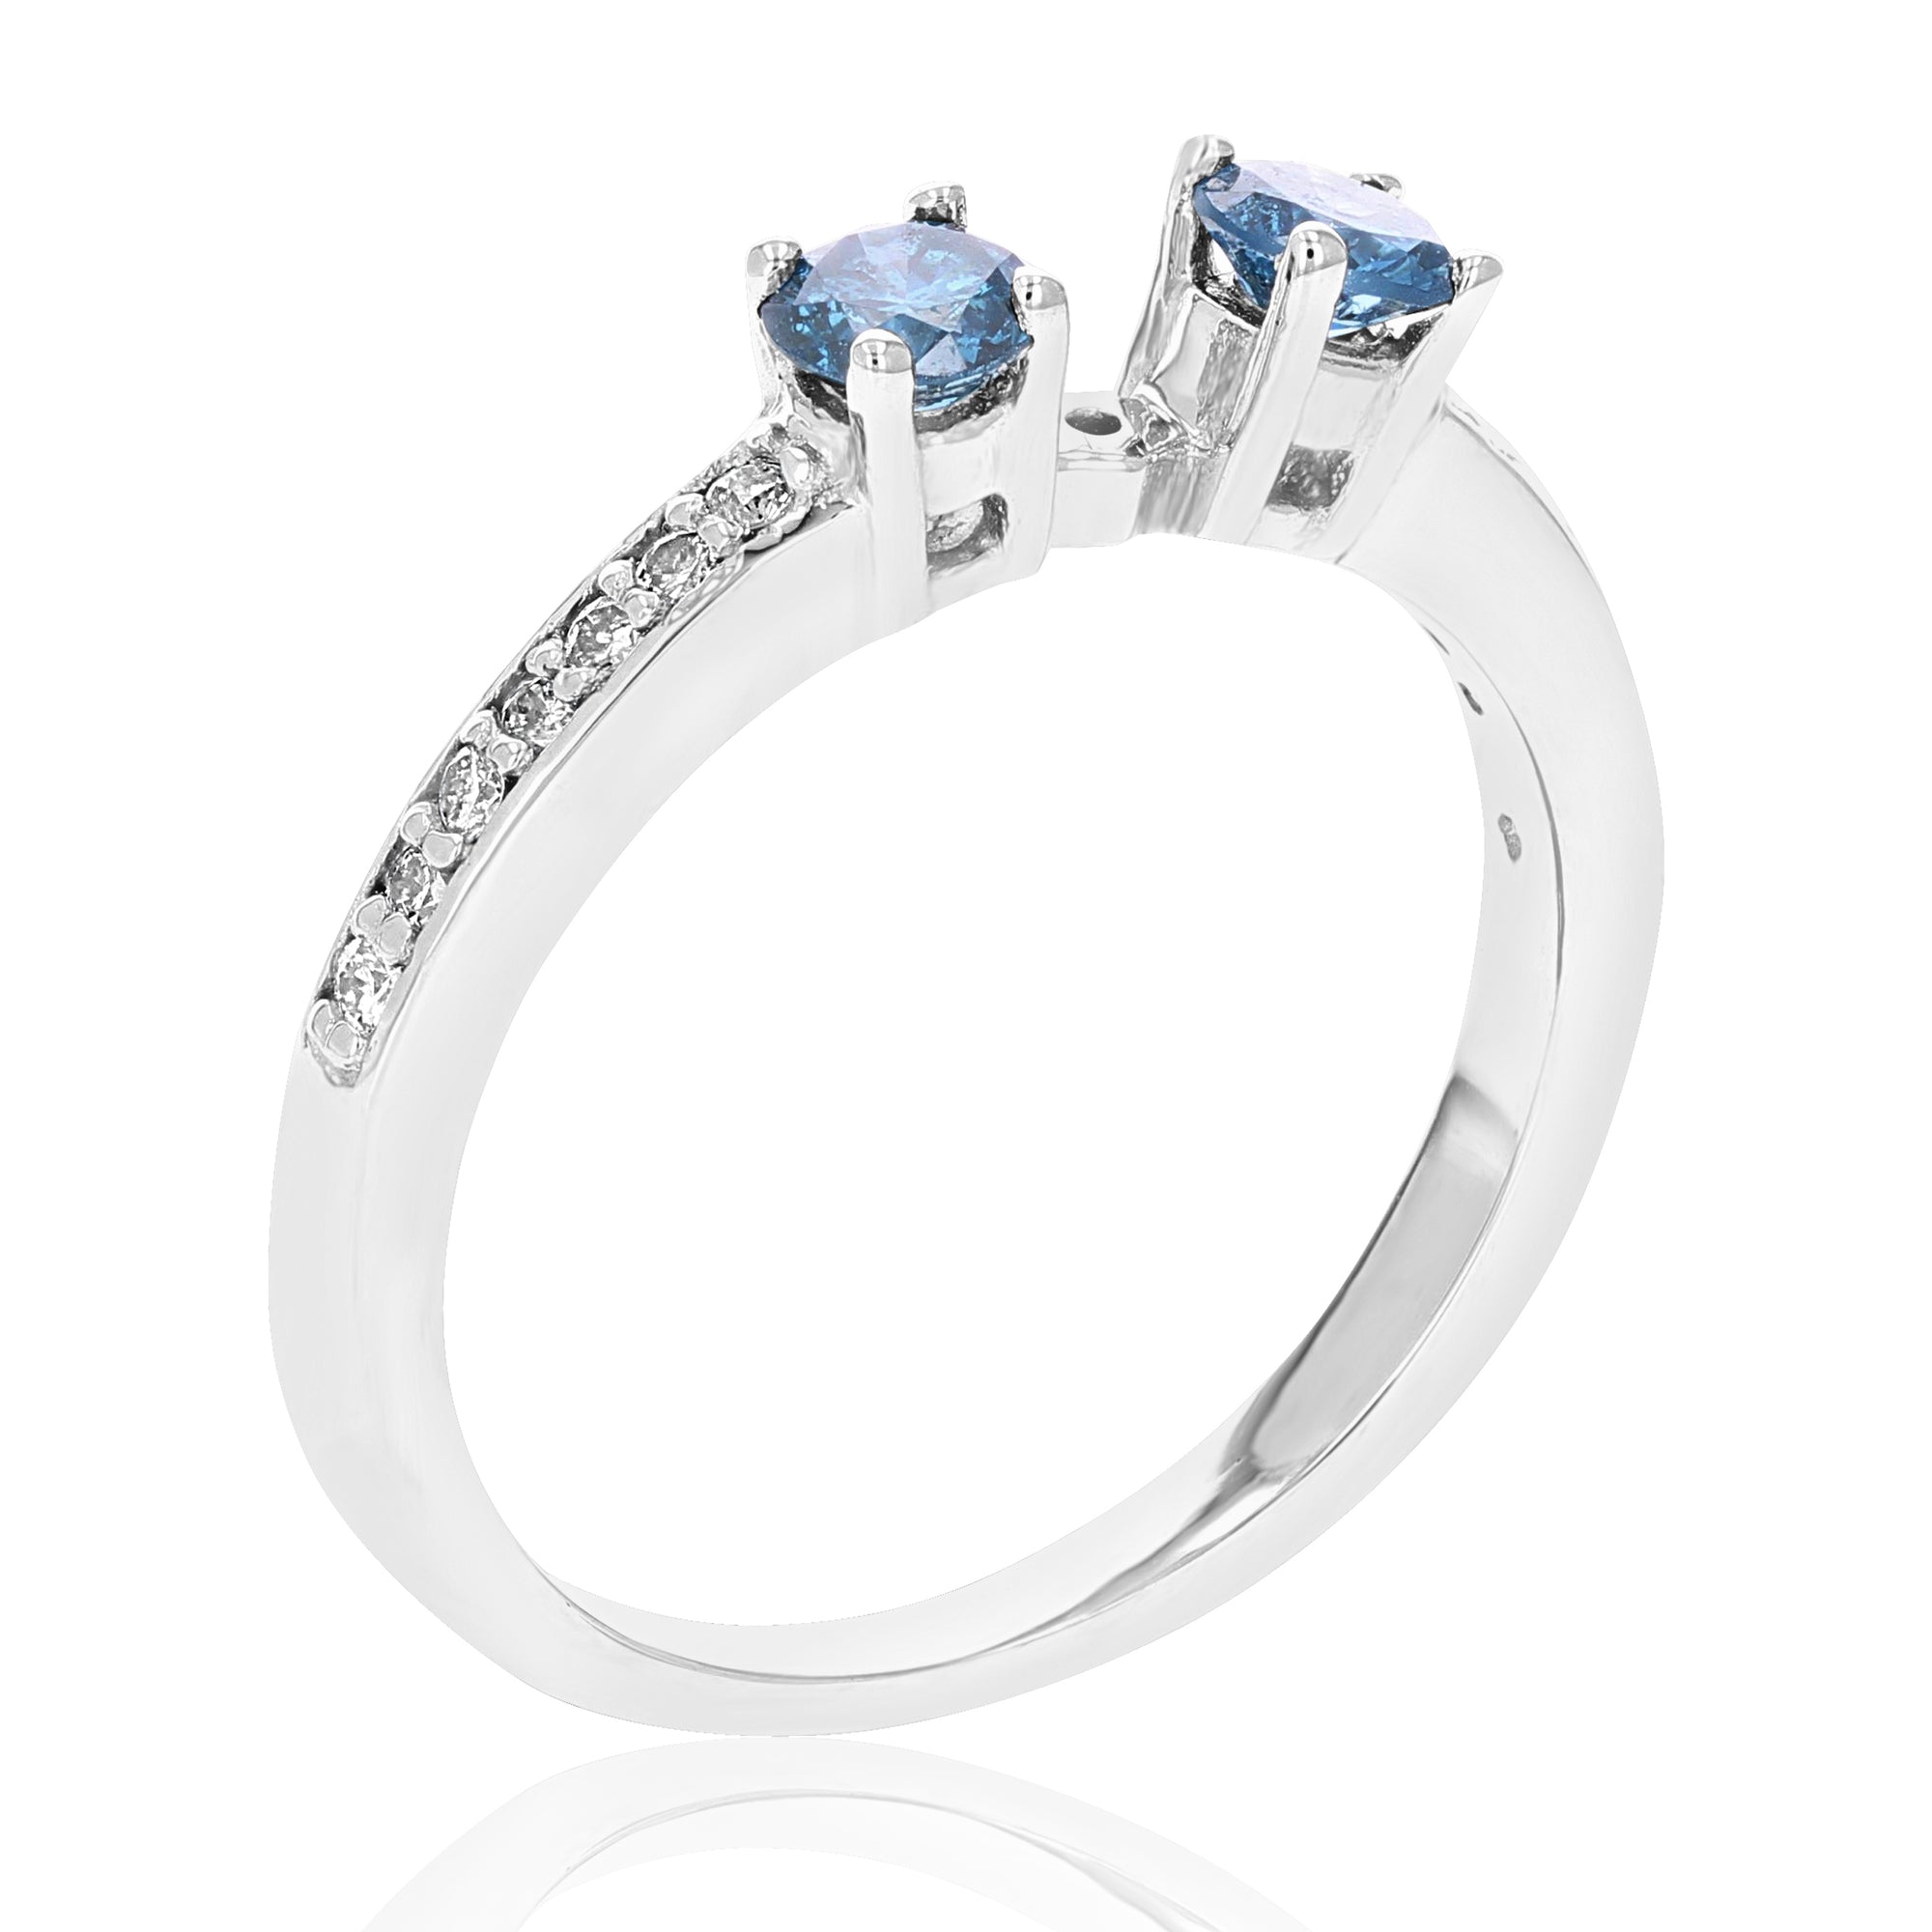 1/3 cttw Semi Mount Blue and White Diamond Engagement Ring 14K White Gold Size 6